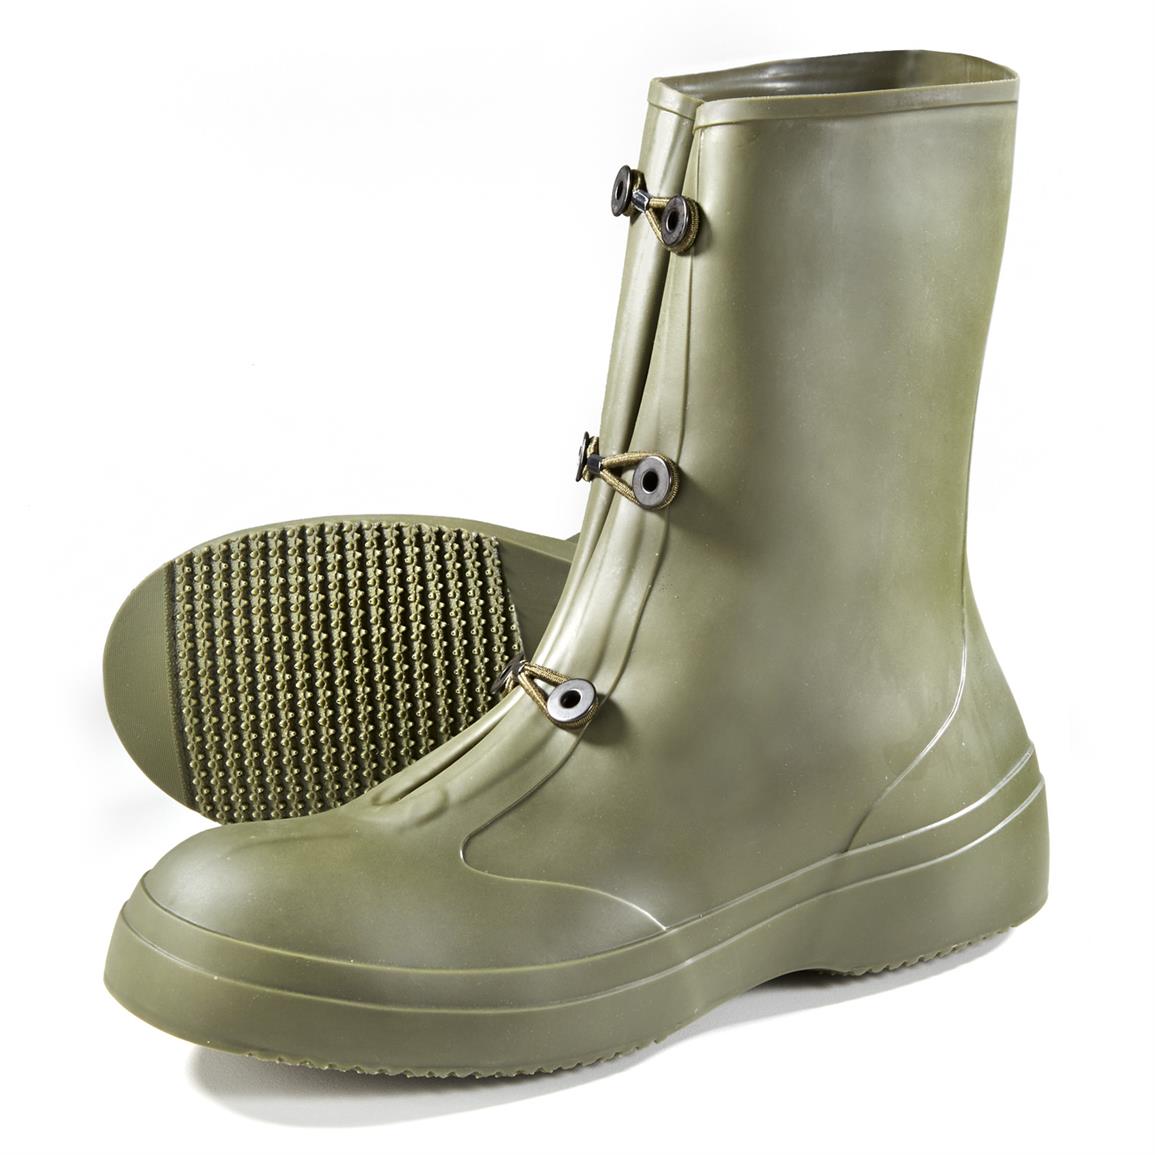 New U.S. Military-issue Overboots